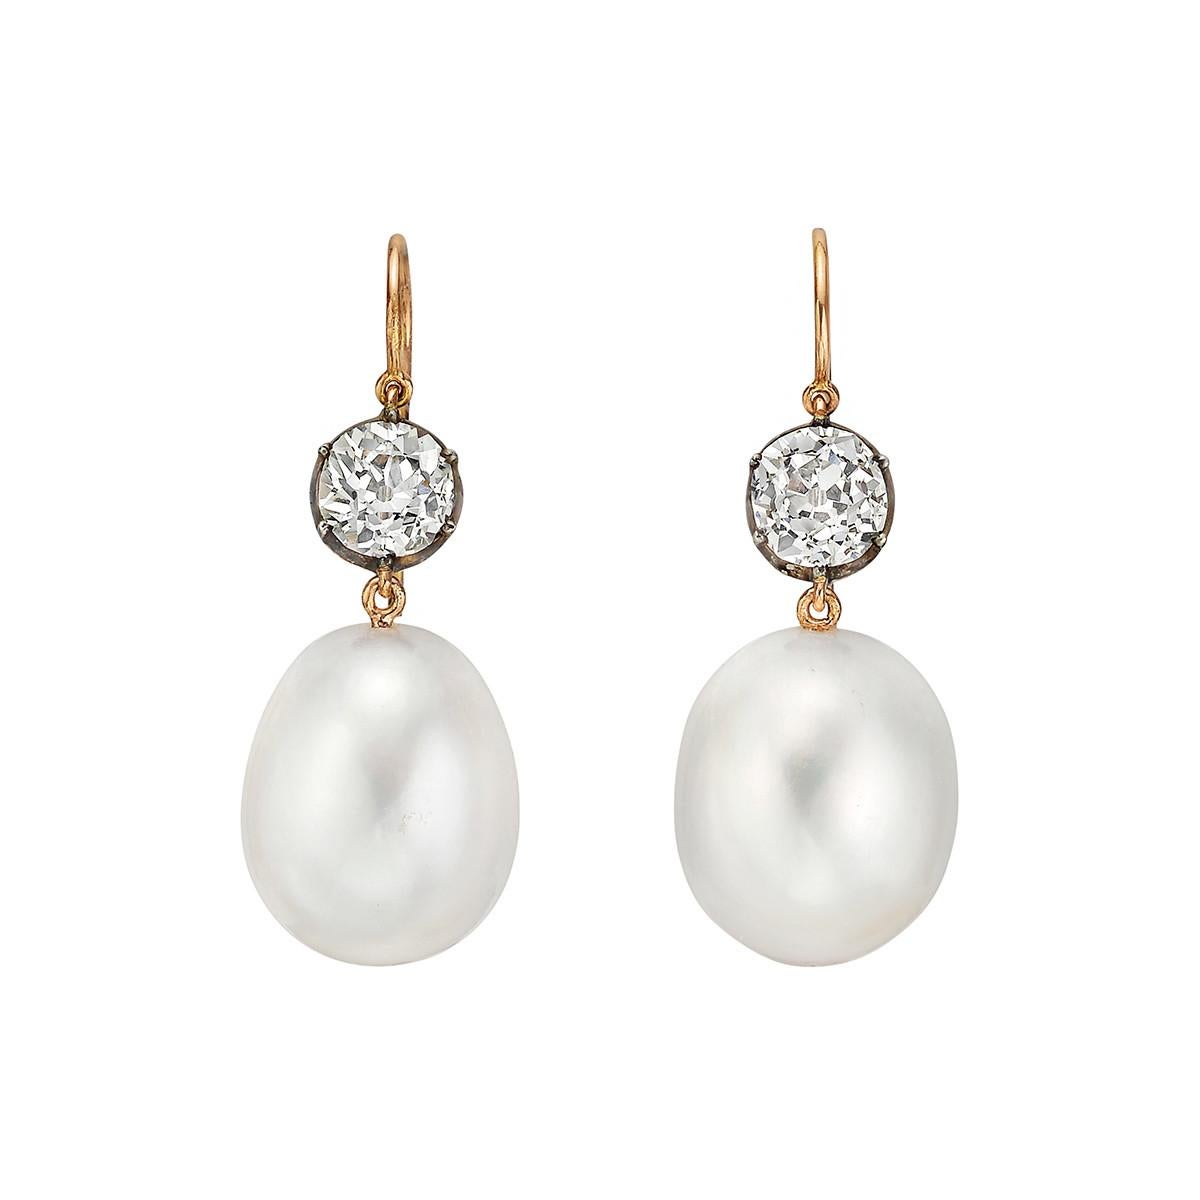 Drop earrings, featuring a cultured South Sea pearl suspended from a bezel-set old mine-cut diamond, in 18k rose gold and blackened silver.

Two diamonds weighing 2.04 total carats
French wires for pierced ears
1.34